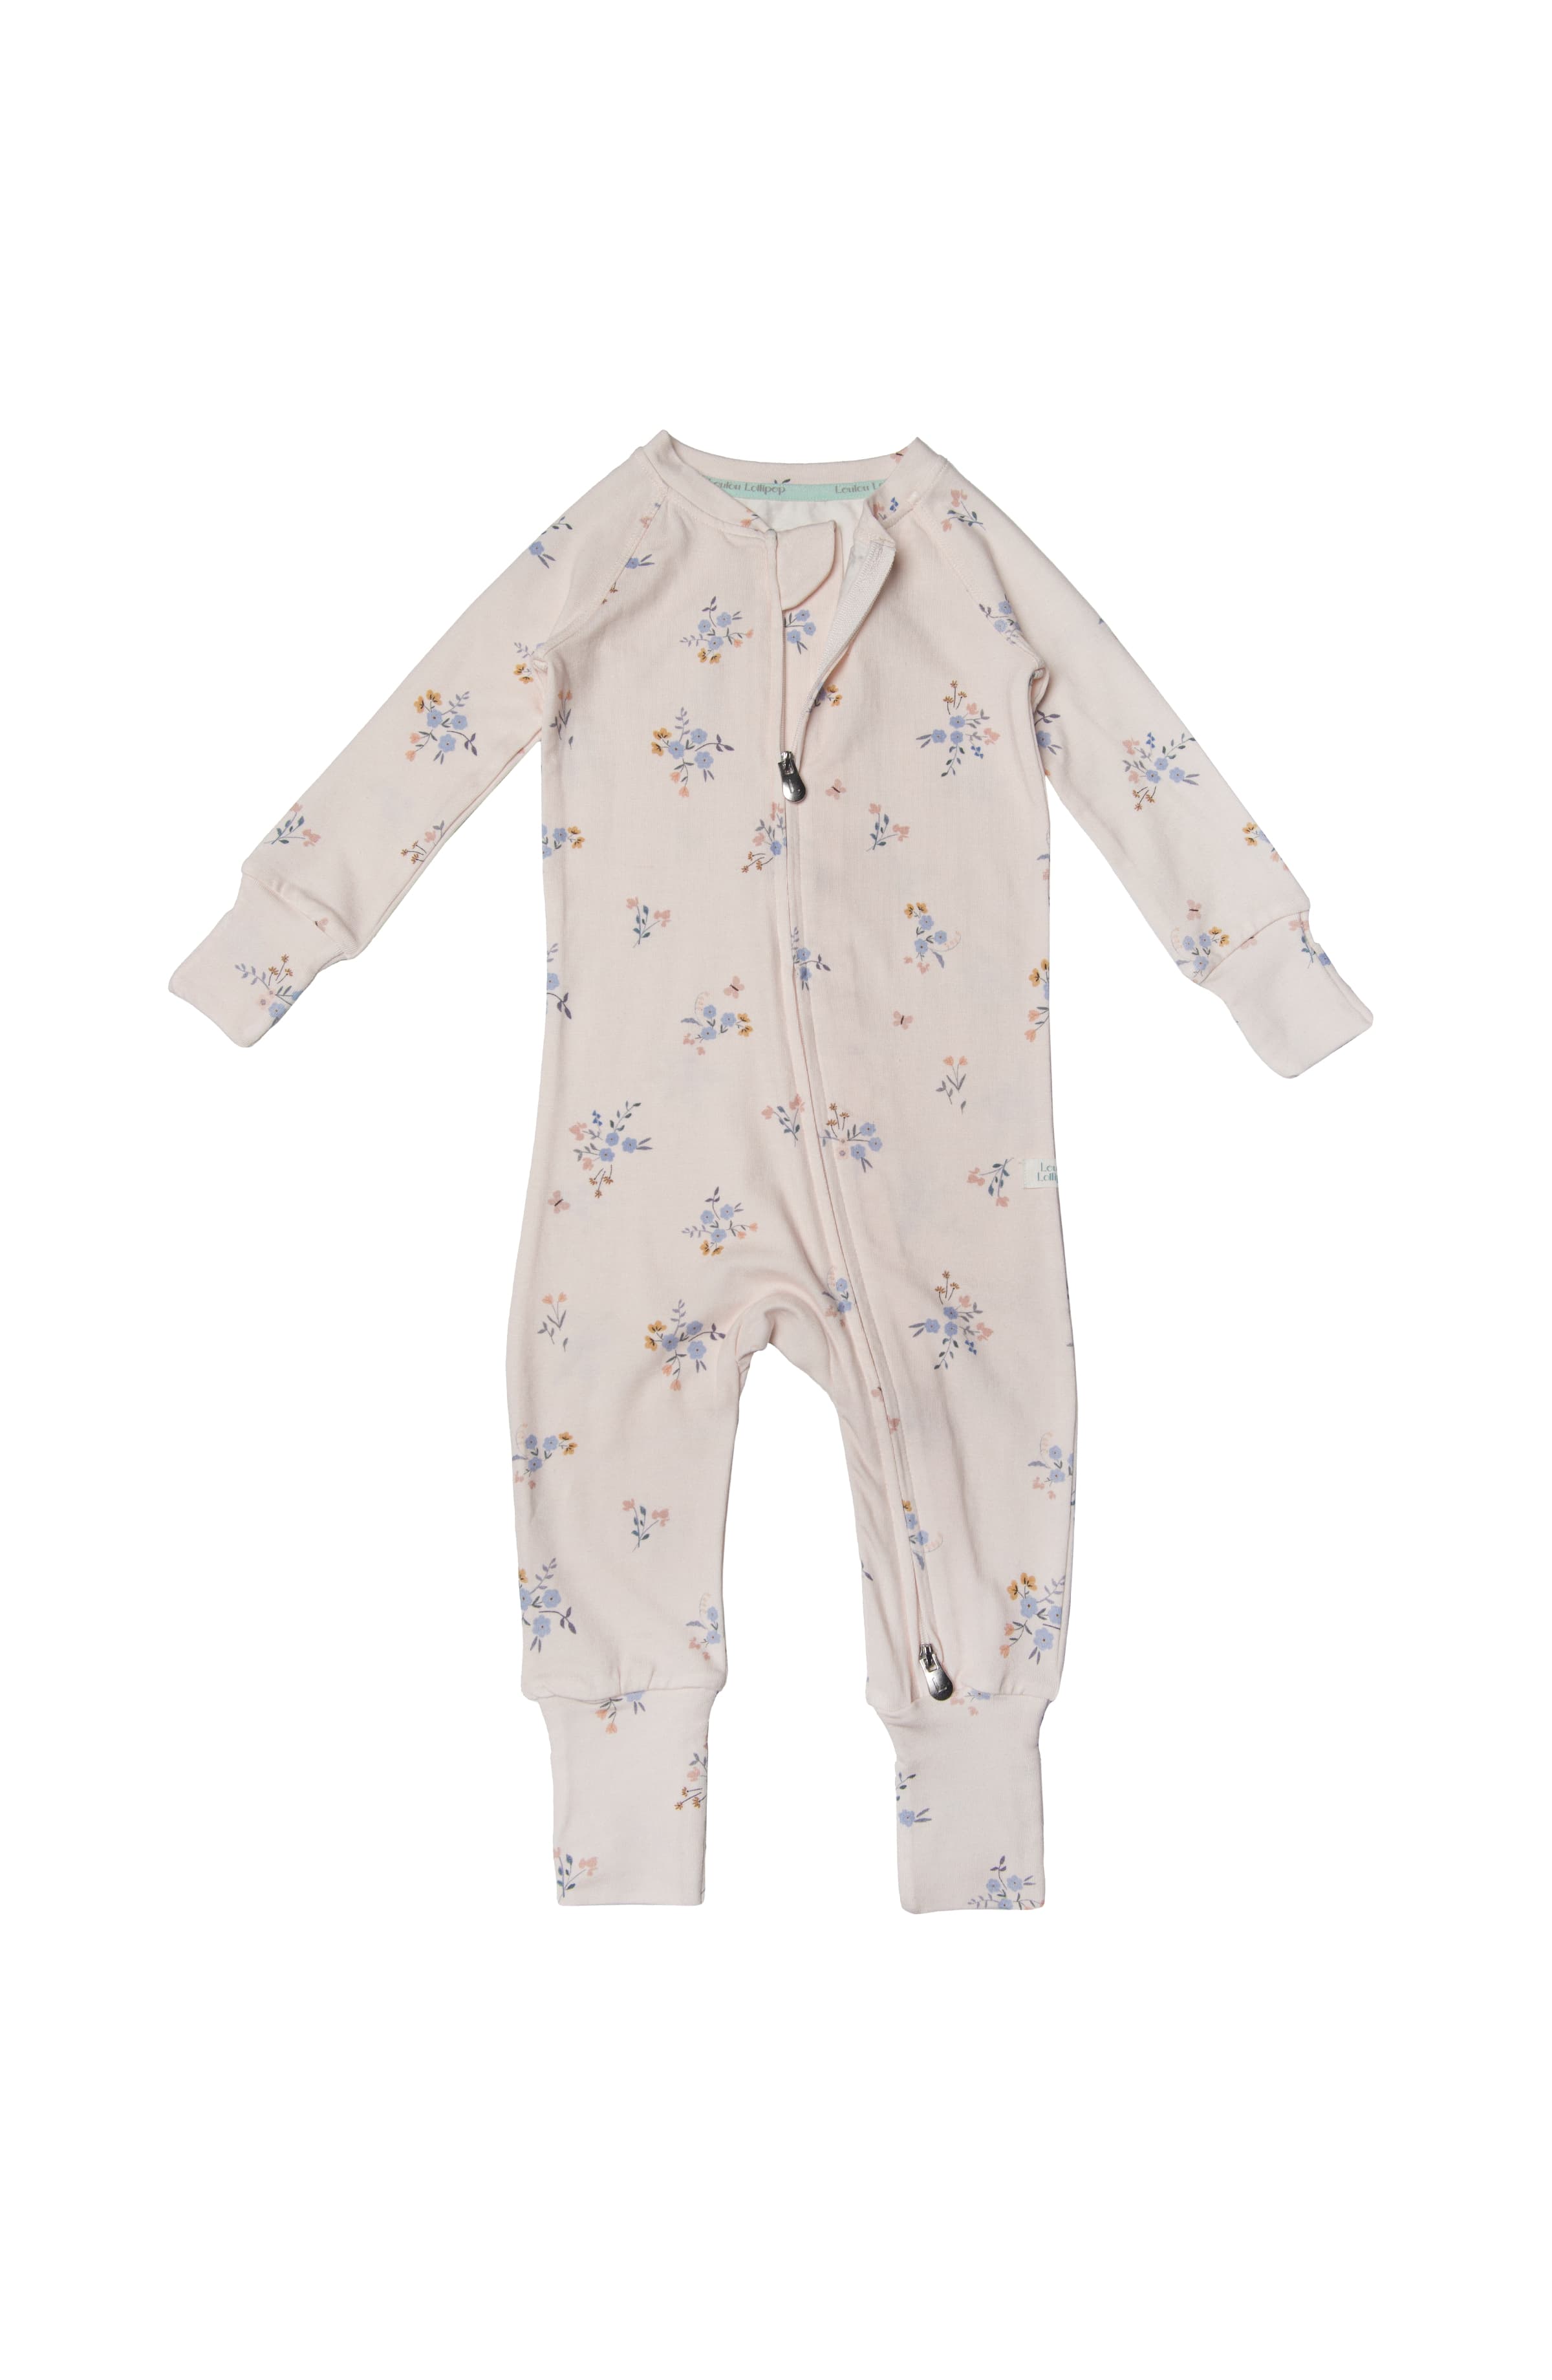 Infant Baby Girls Sleeper Pajamas 0-3 Months for Sale in Sun City